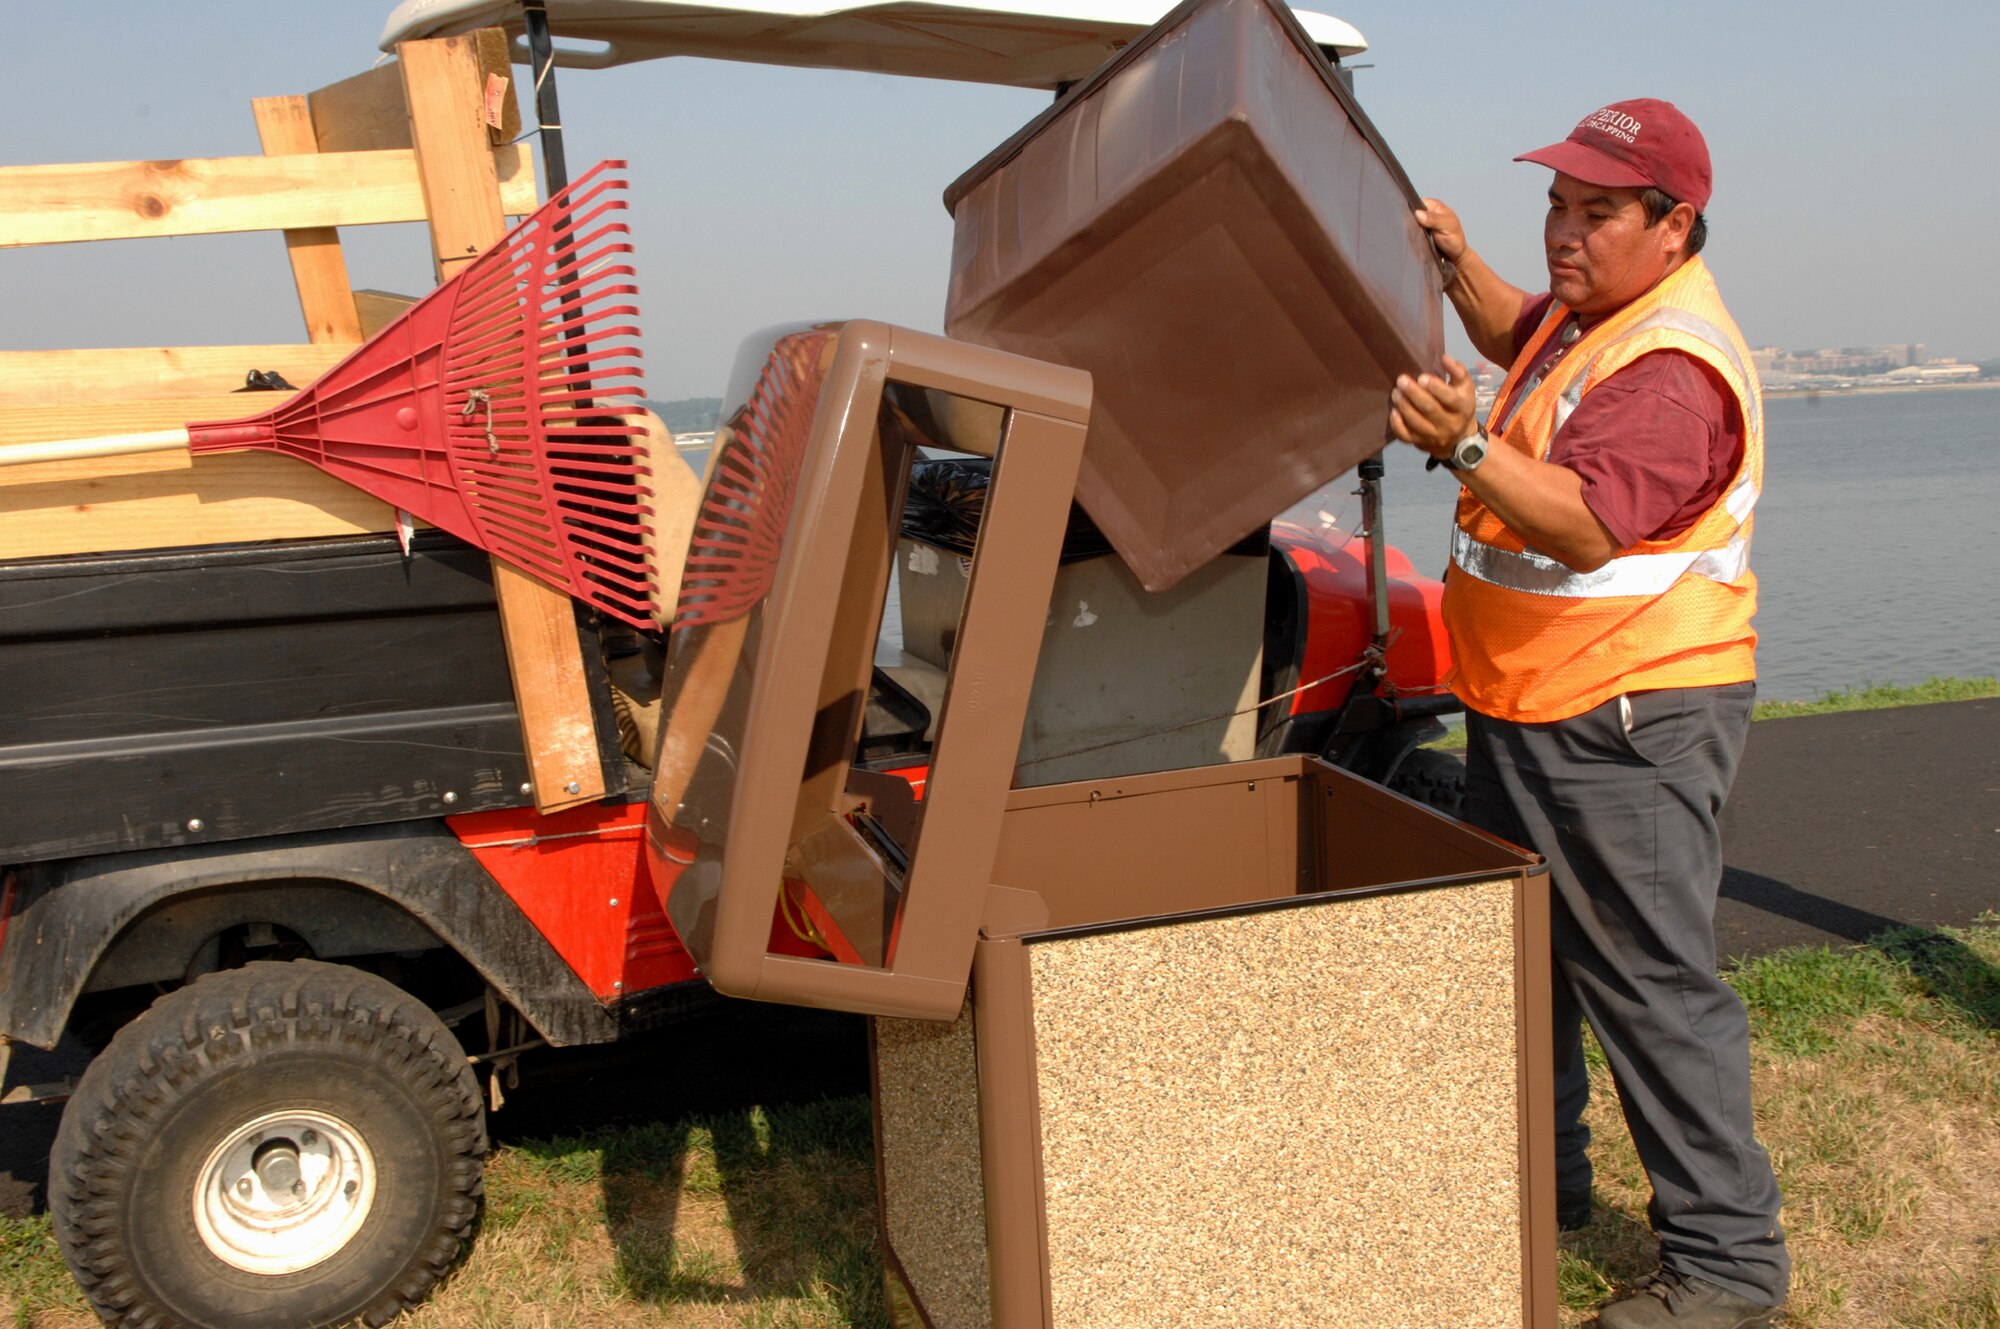 Julio Martinez empties the trash along the Potomac River on Bolling Aug 2. Mr. Martinez is one of the many civilian contractors that take care of the grounds on the base, doing any number of jobs that keep our base well maintained and looking good. (U.S. Air Force photo by Airman 1st Class Timothy Chacon)